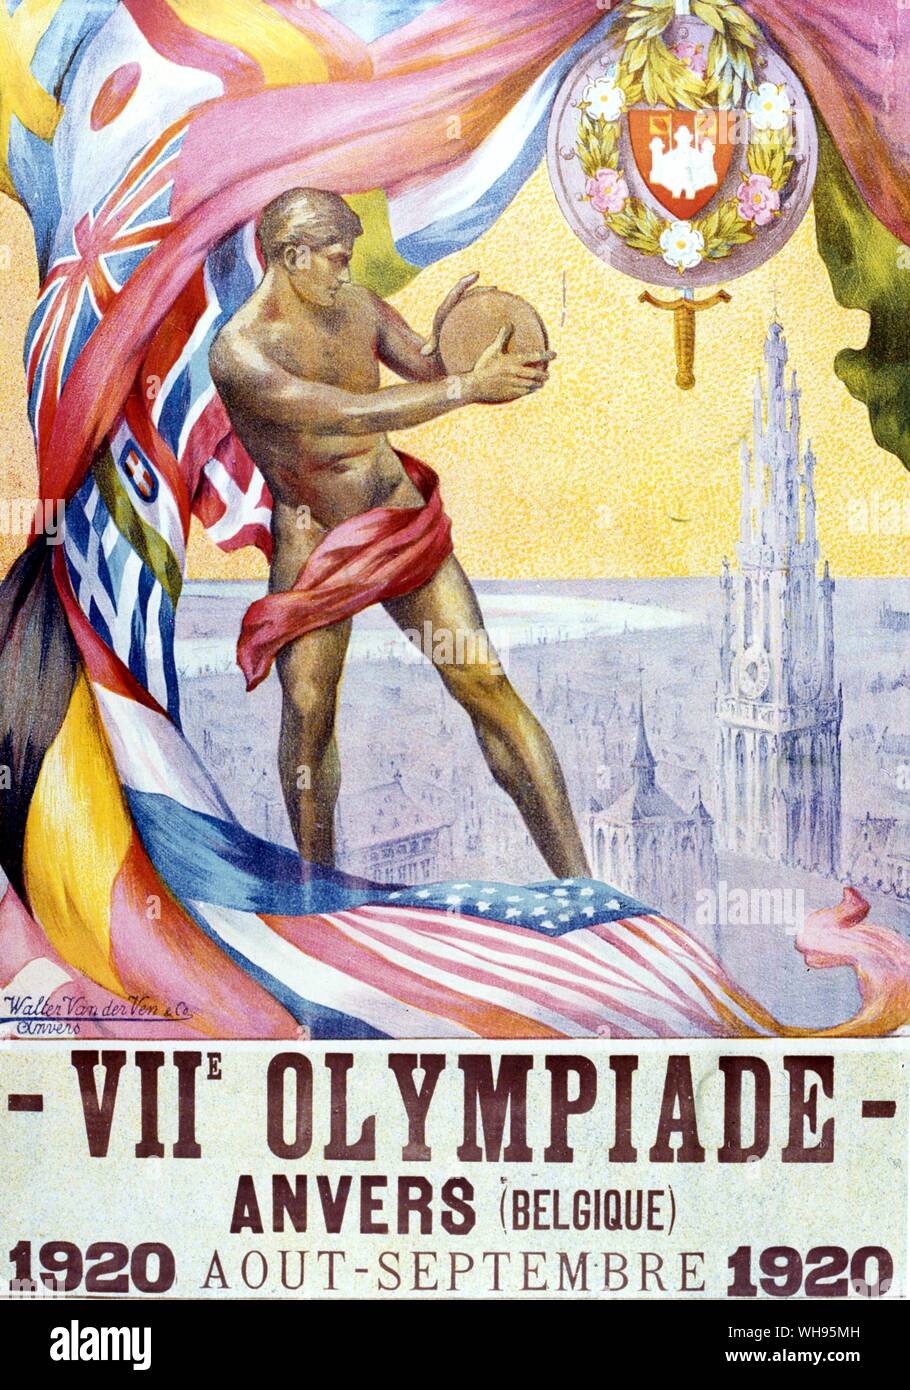 Materie artistiche: Ephemera/ Anvers Olympic poster, 1920 Foto Stock